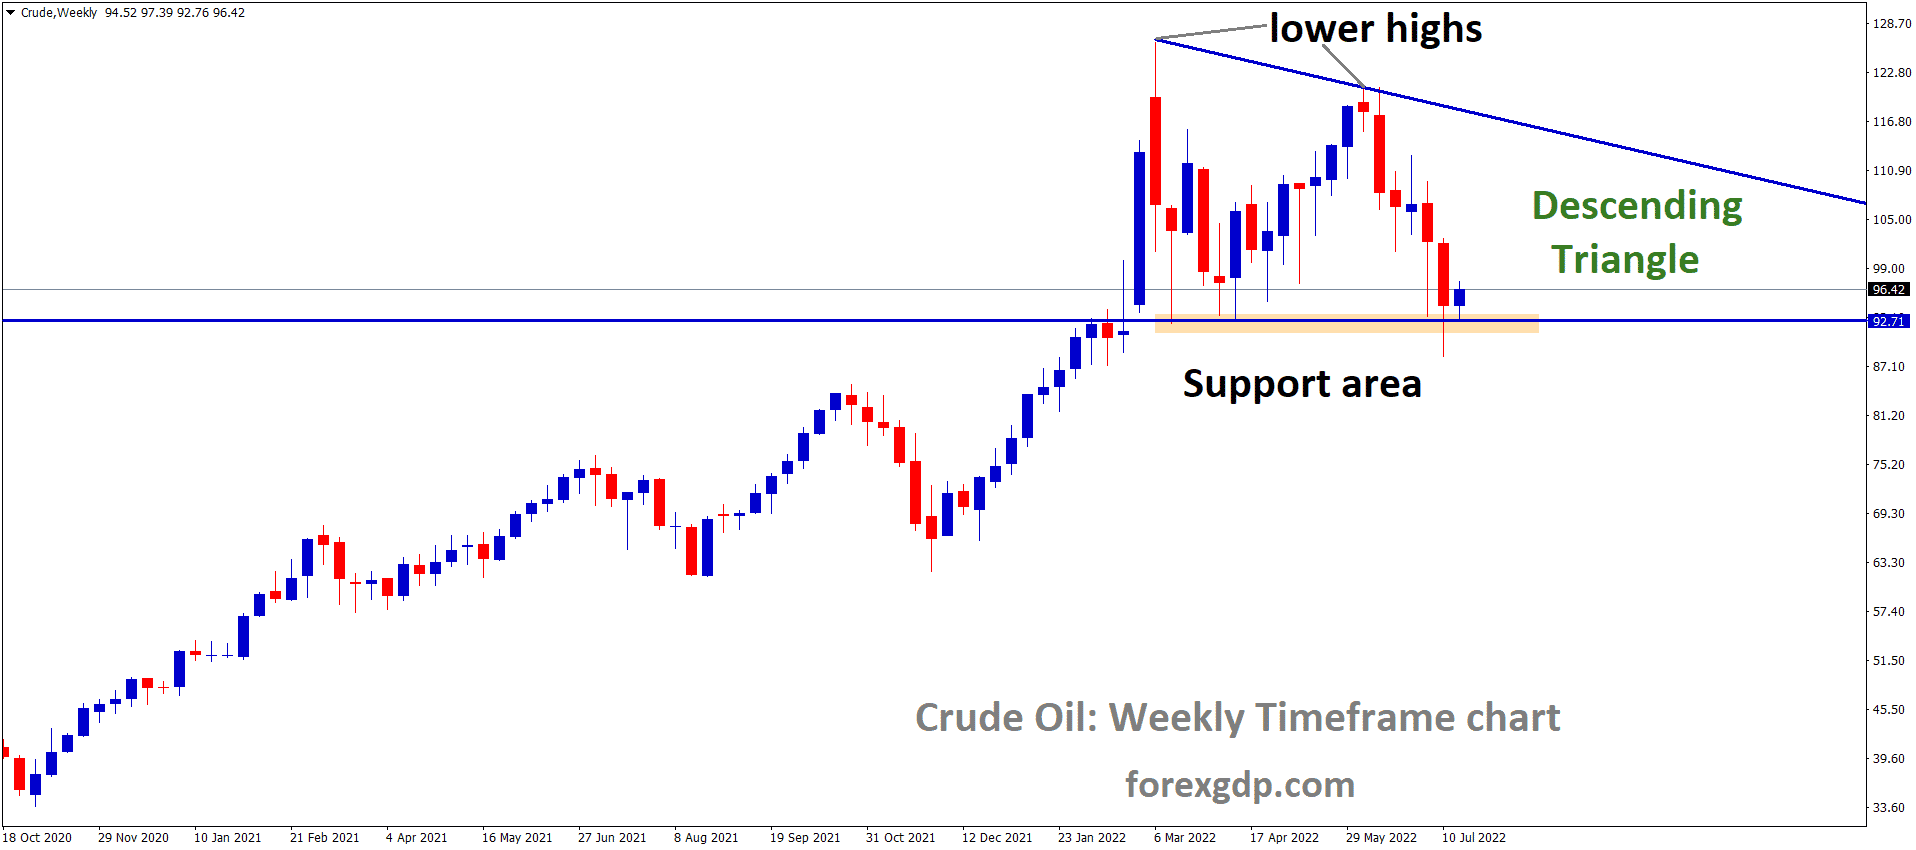 Crude Oil is moving in the Descending triangle pattern and the market has rebounded from the horizontal support area of the pattern.